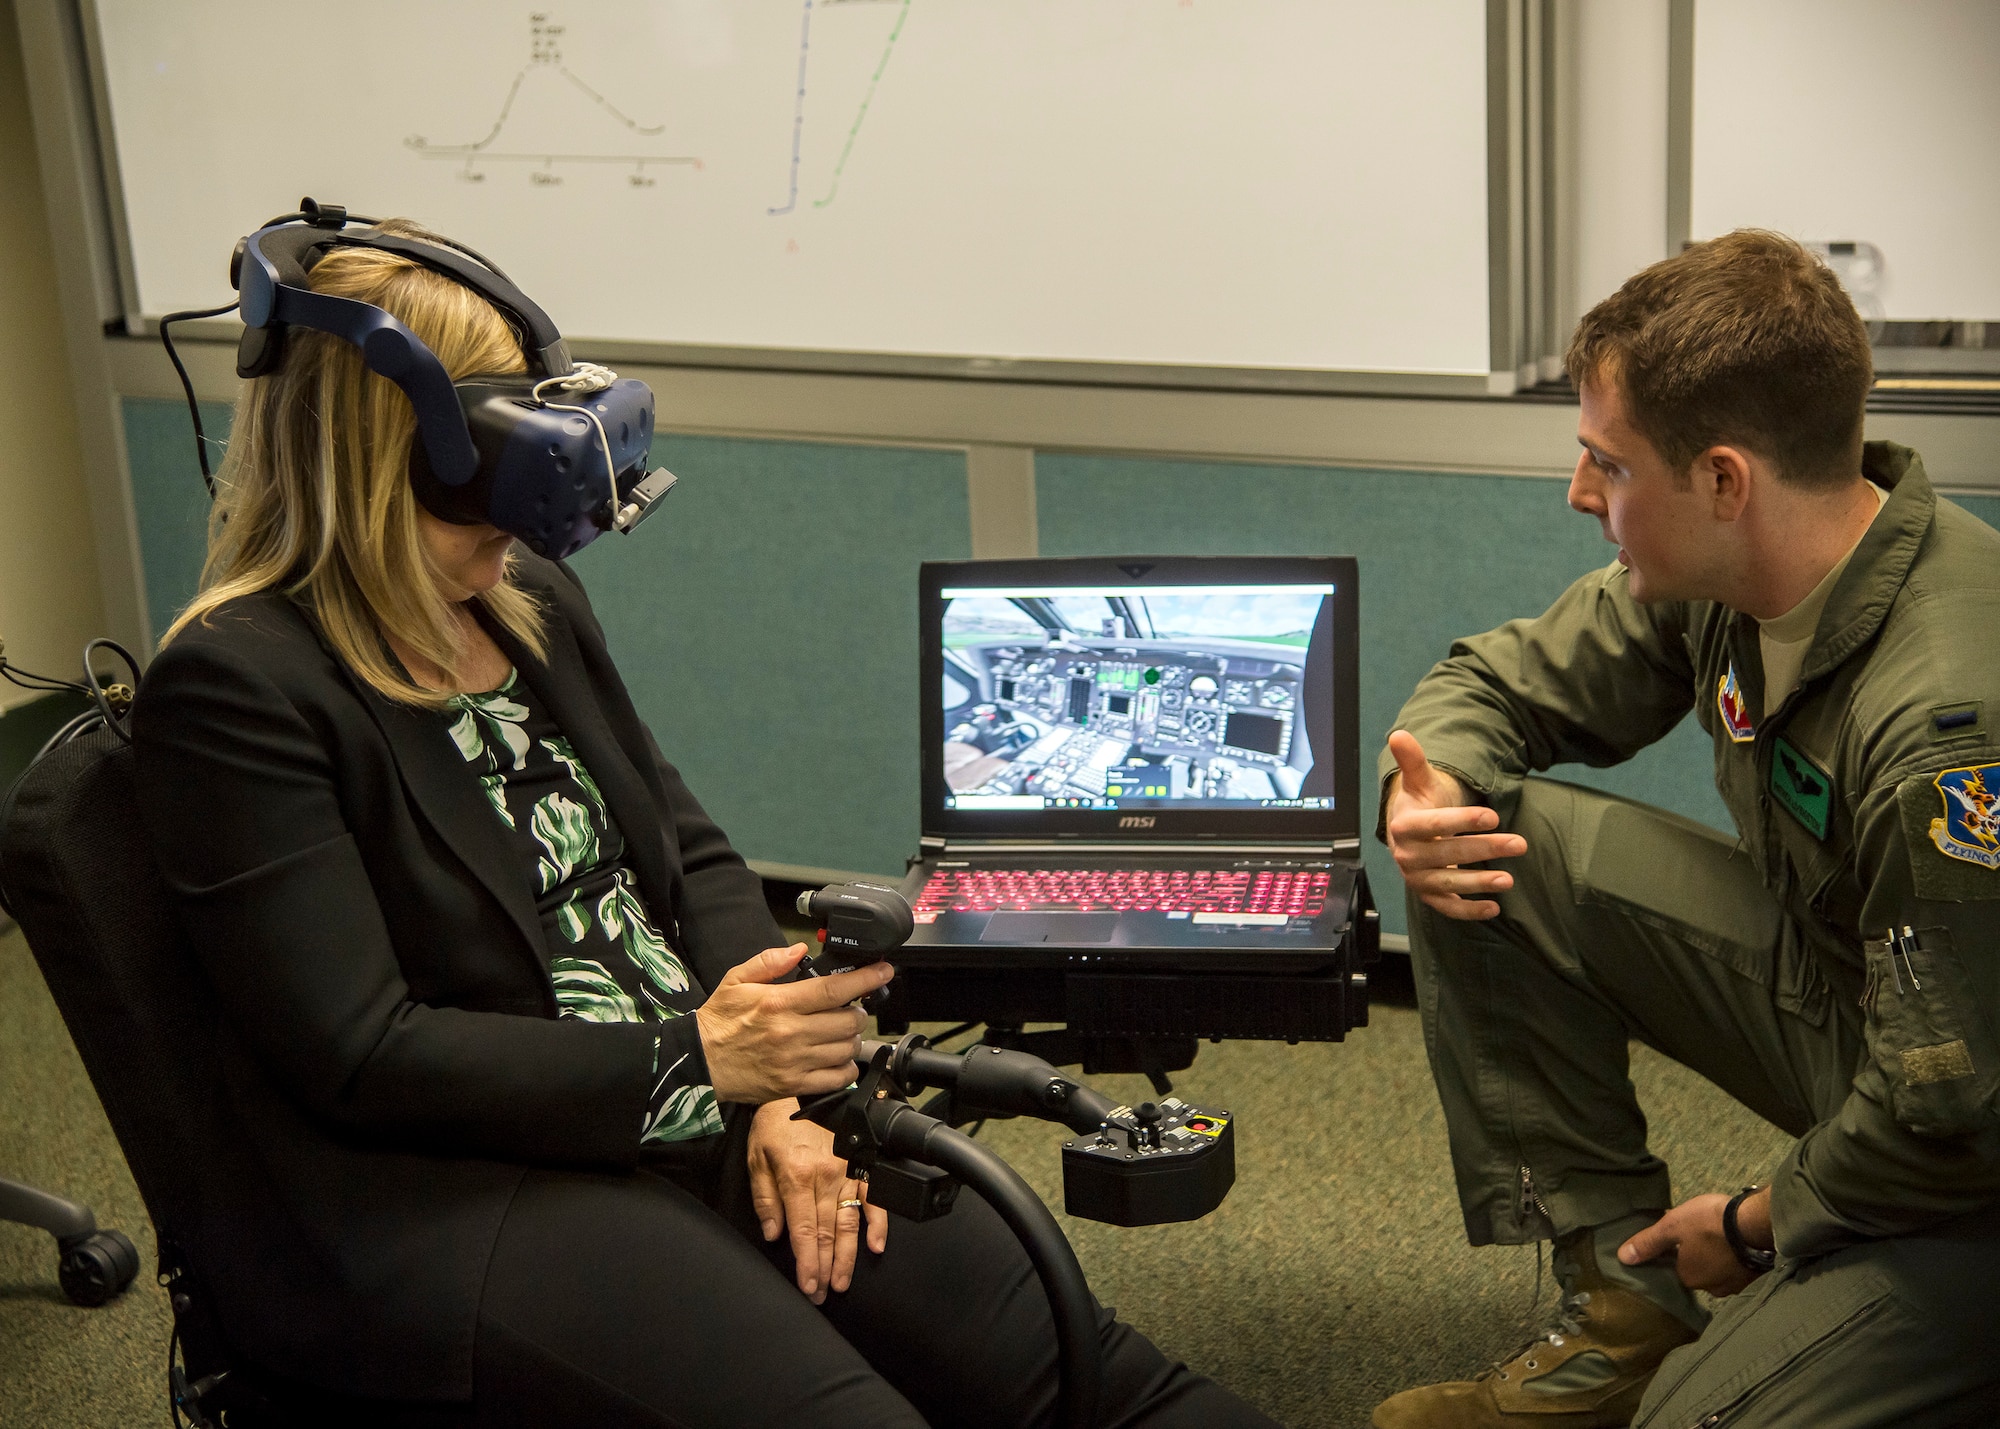 1st Lt. Patrick Livingston, 41st Rescue Squadron (RQS), HH-60G Pave Hawk co-pilot, gives instruction on their virtual reality flight simulator to Dr. Donna Joyce, science and technology advisor to Air Combat Command, May 16, 2019, at Moody Air Force Base, Ga. Dr. John Matyjas and Joyce visited the 41st RQS to tour and assess their VR simulator along with taking a fam flight on an HH-60G Pave Hawk. The visit is a part of an Air Force assessment of the possible implementation of VR in training. The 41st RQS VR flight simulator is an initiative that was selected at the Moody Air Force Base 2018 Spark Tank competition. (U.S. Air Force photo by Airman 1st Class Eugene Oliver)